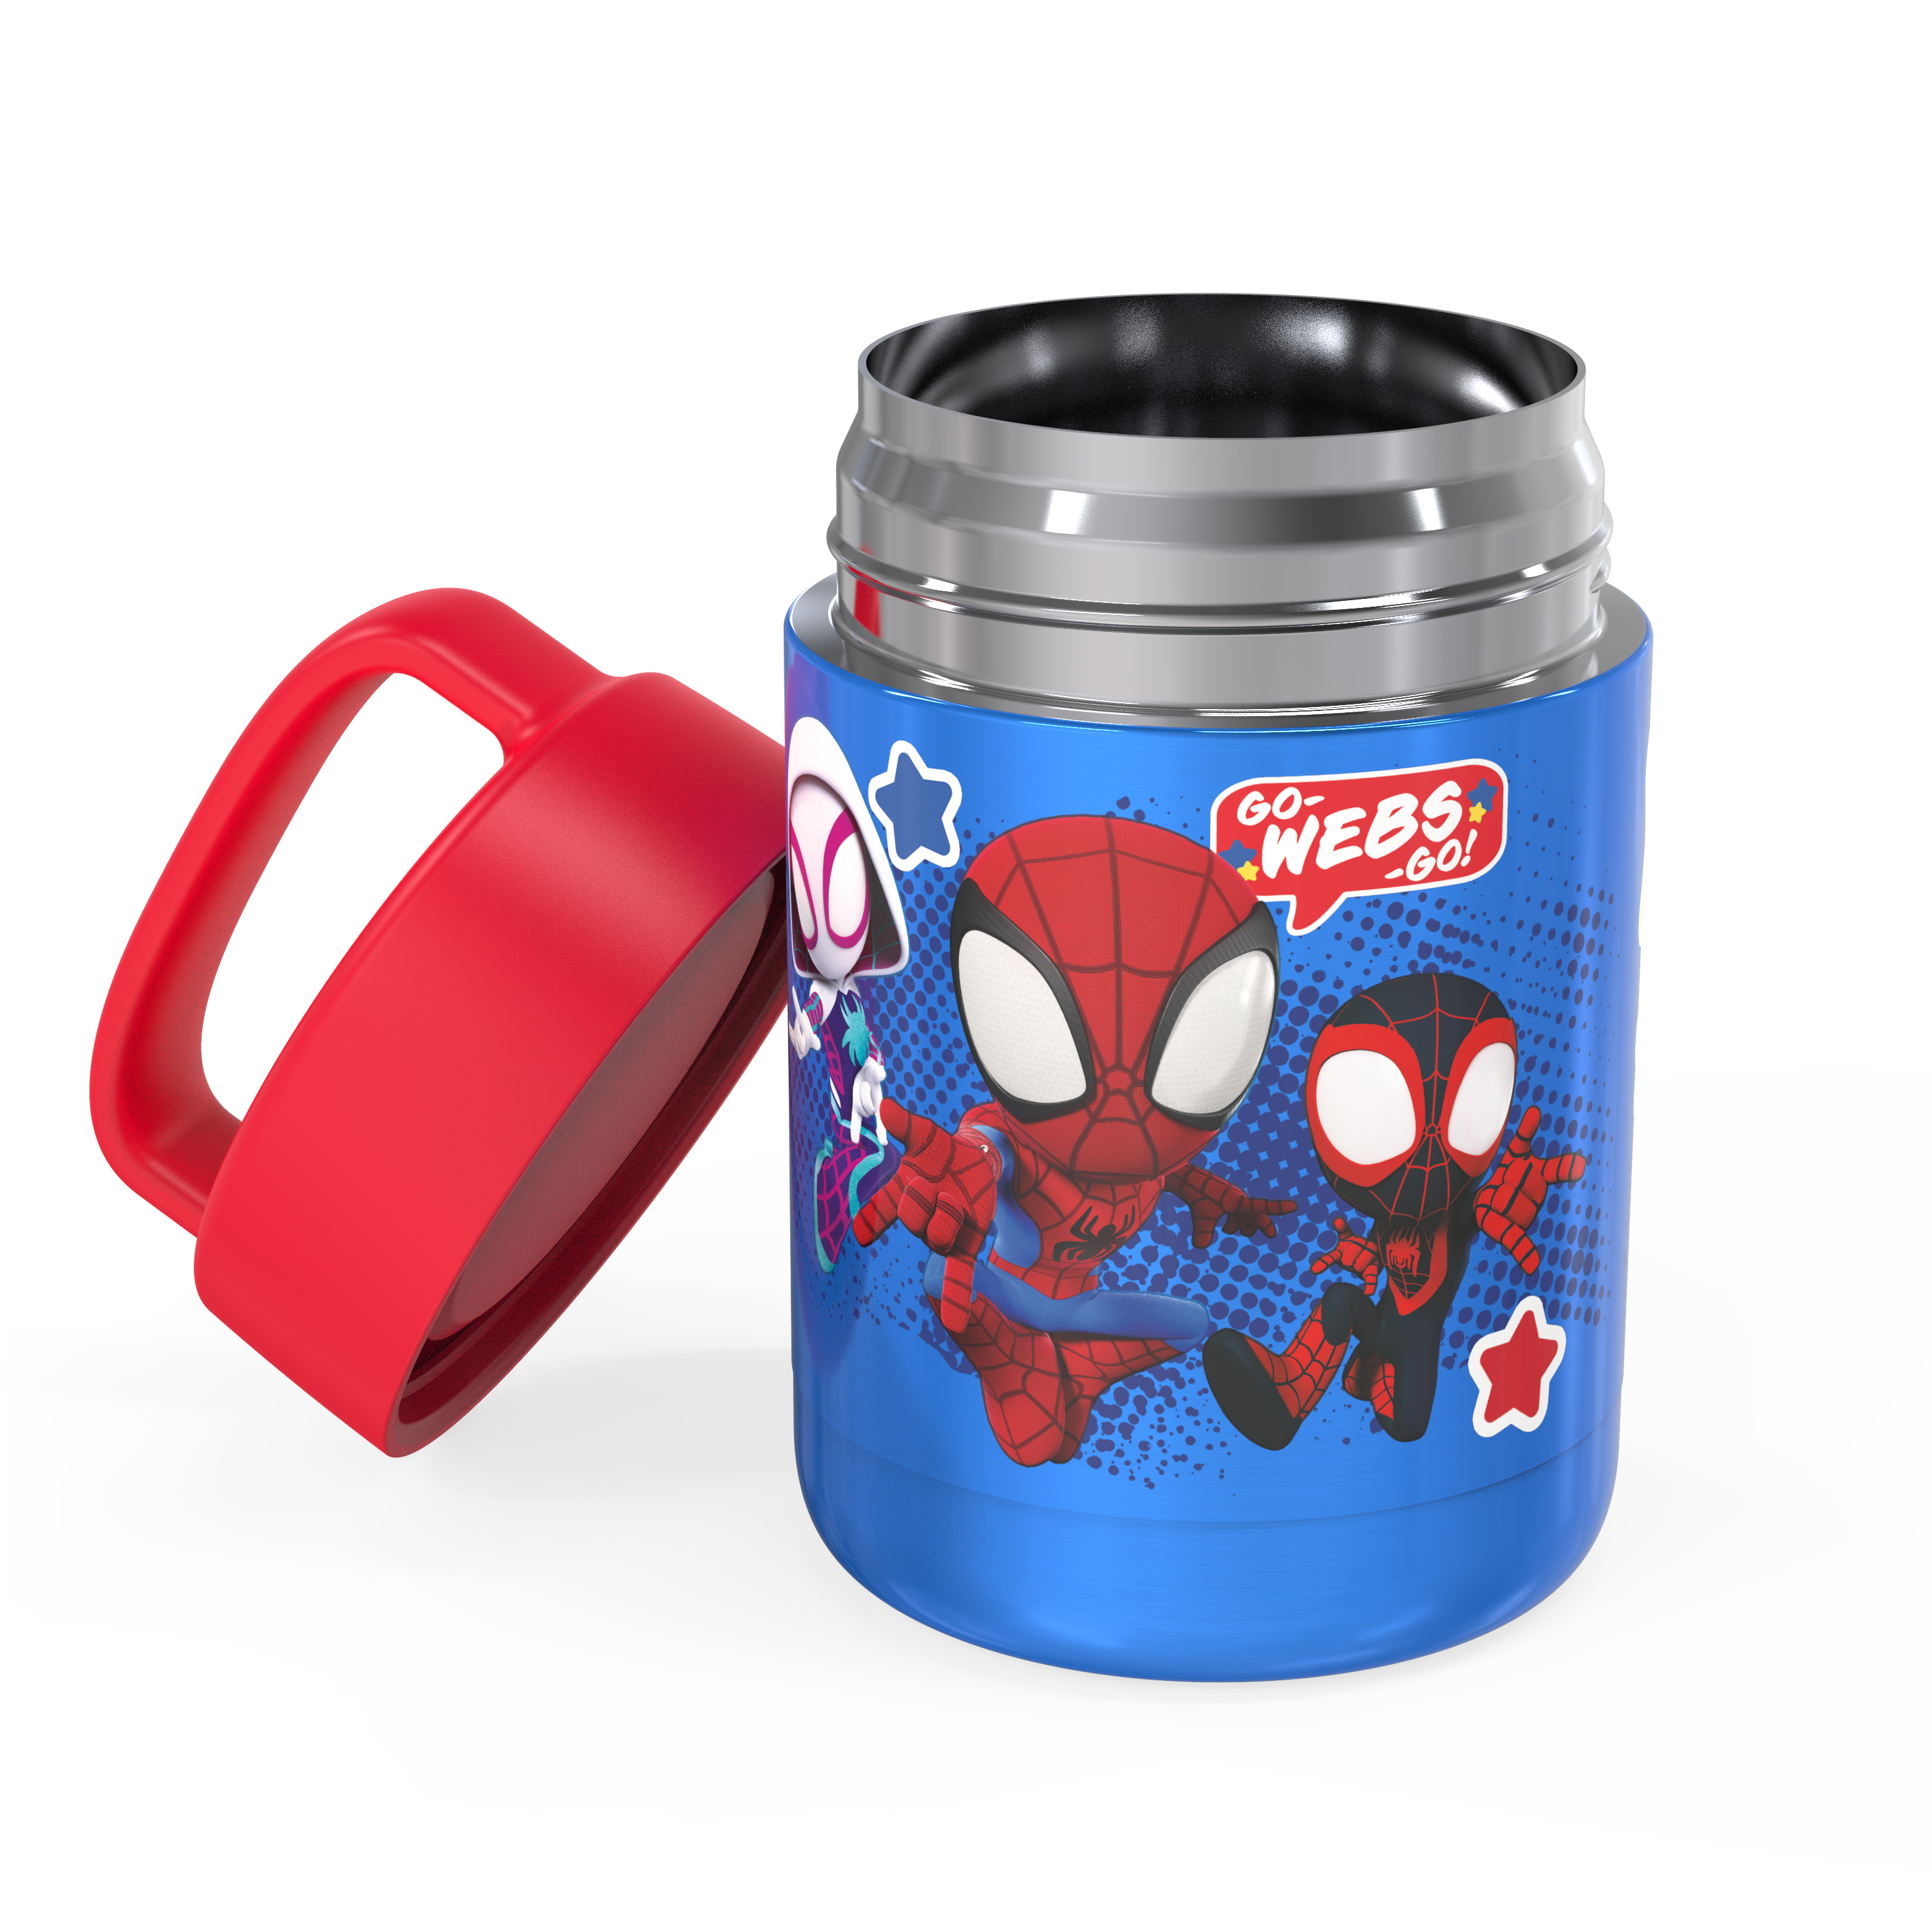 Spider-Man and His Amazing Friends Reusable Vacuum Insulated Stainless Steel Food Container, Spider-Friends slideshow image 3